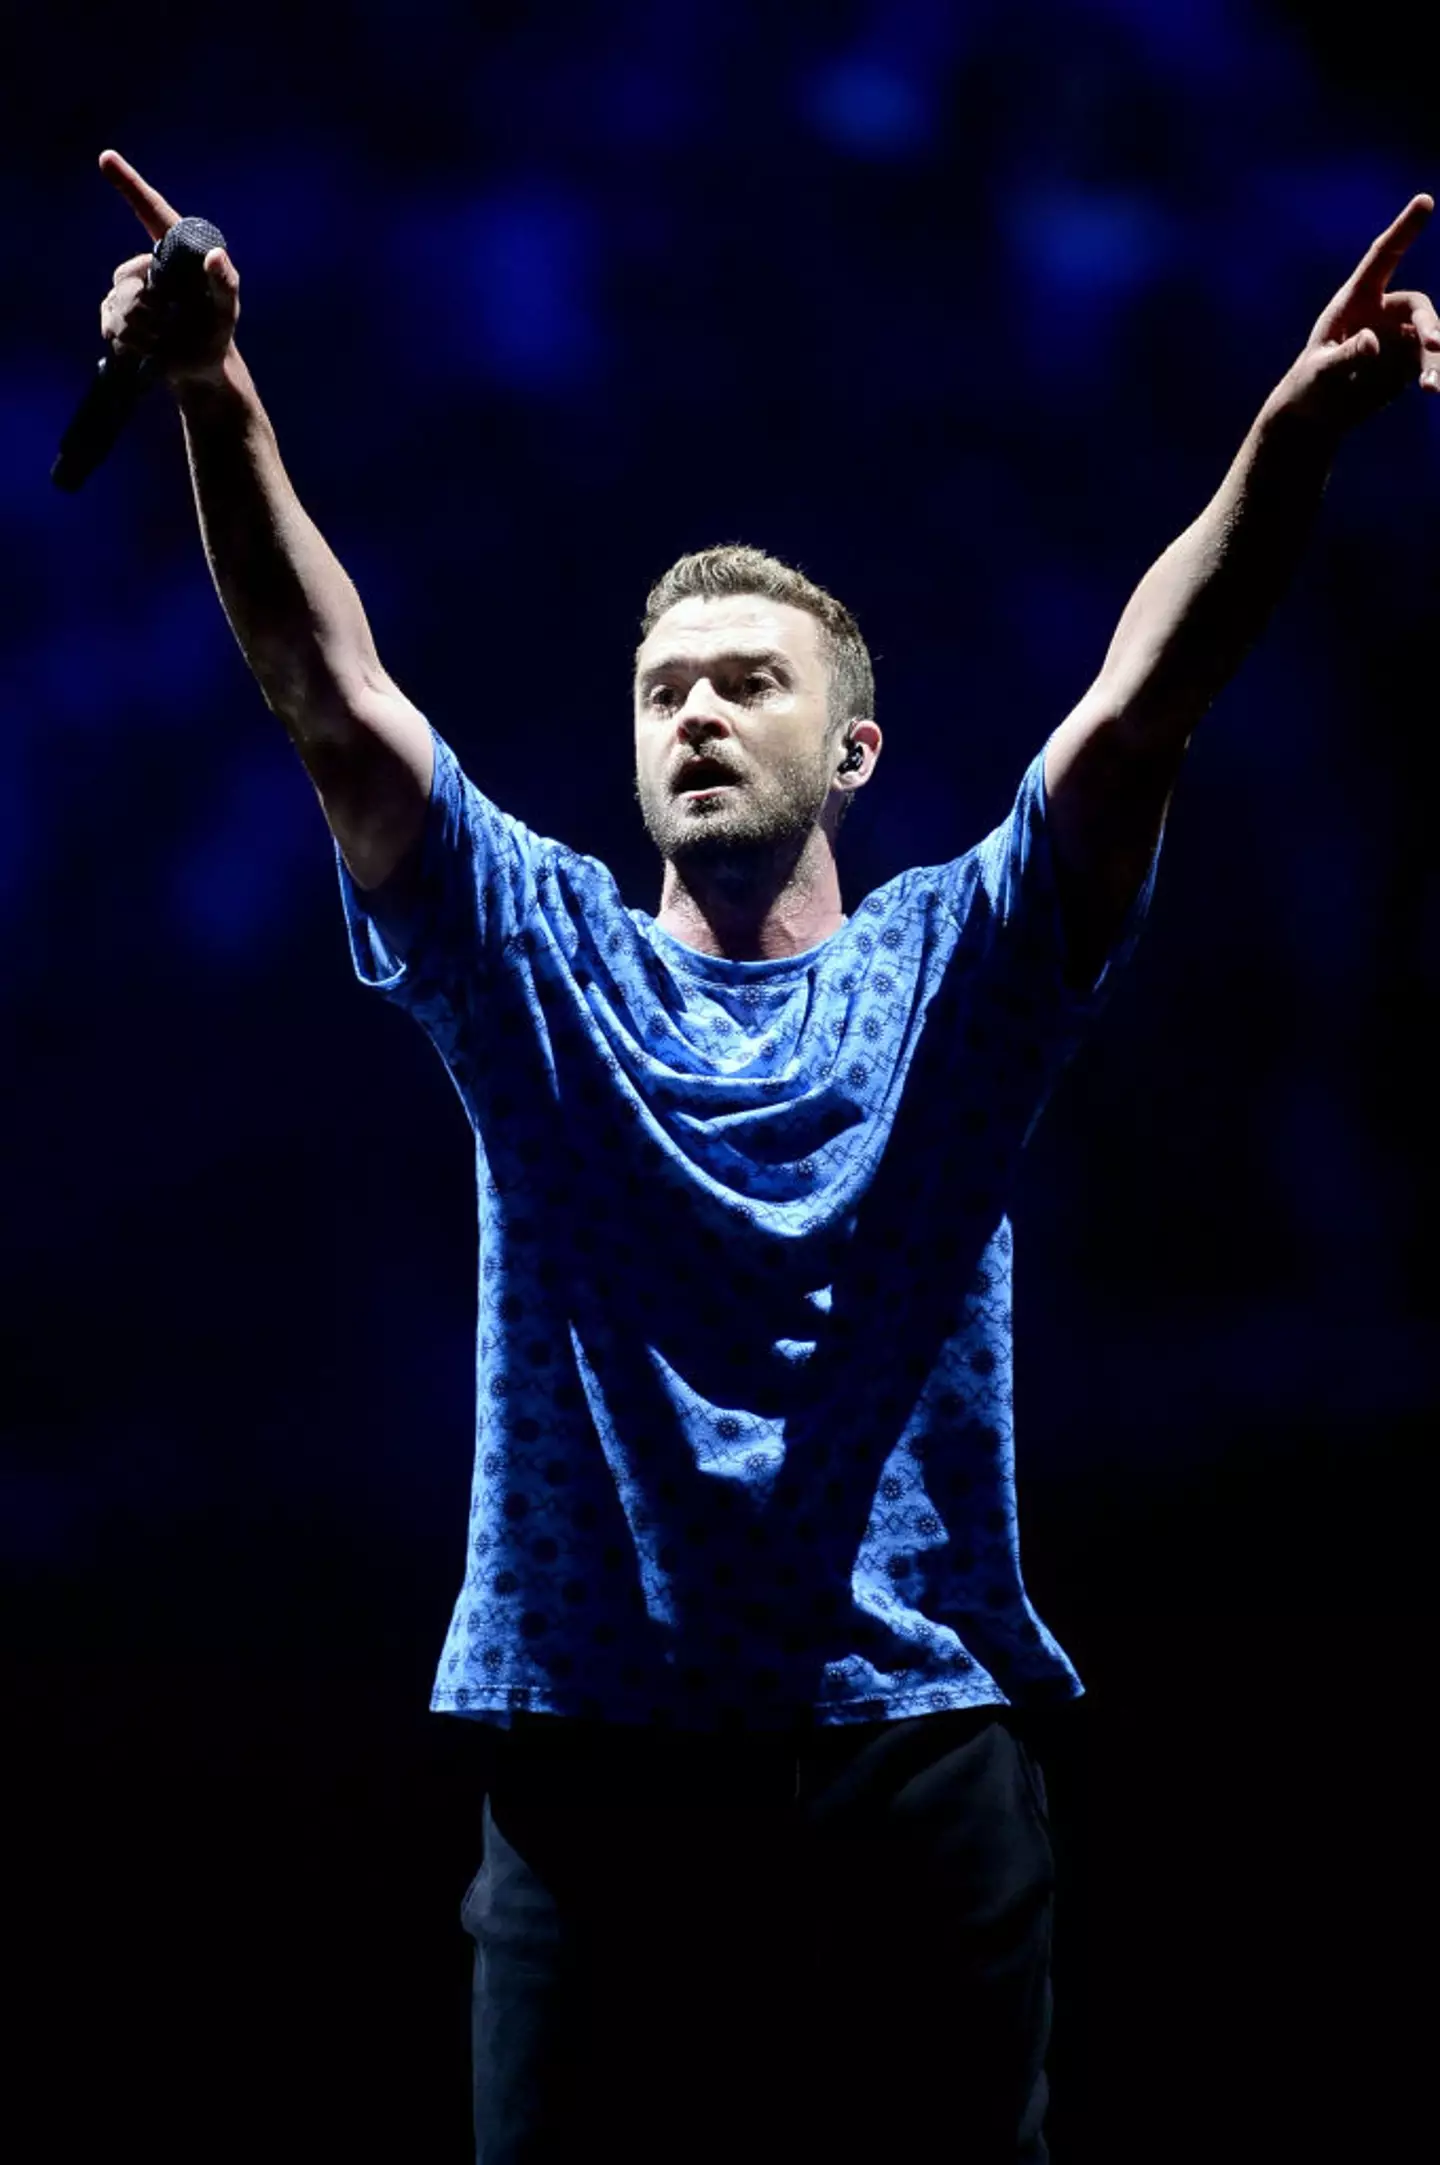 Justin Timberlake told the crowd ‘no disrespect’ before performing 'Cry Me A River'.